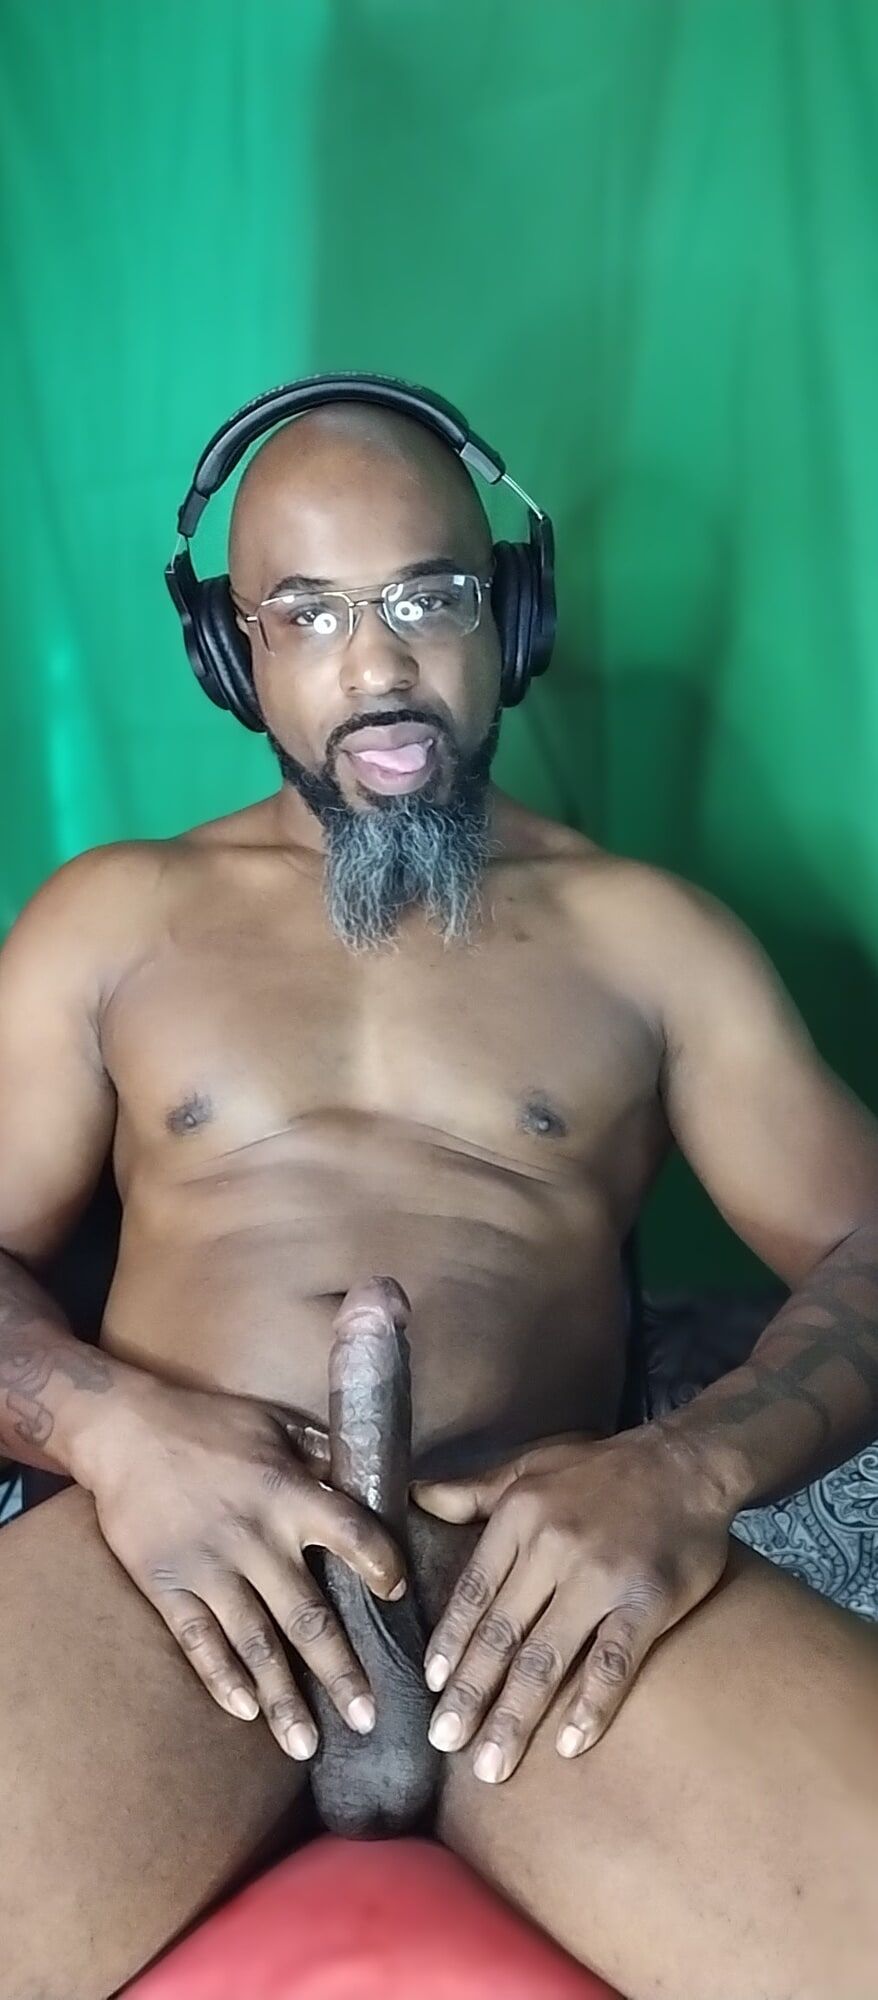 big black cock all in your mouth - get on your knees for me. #7